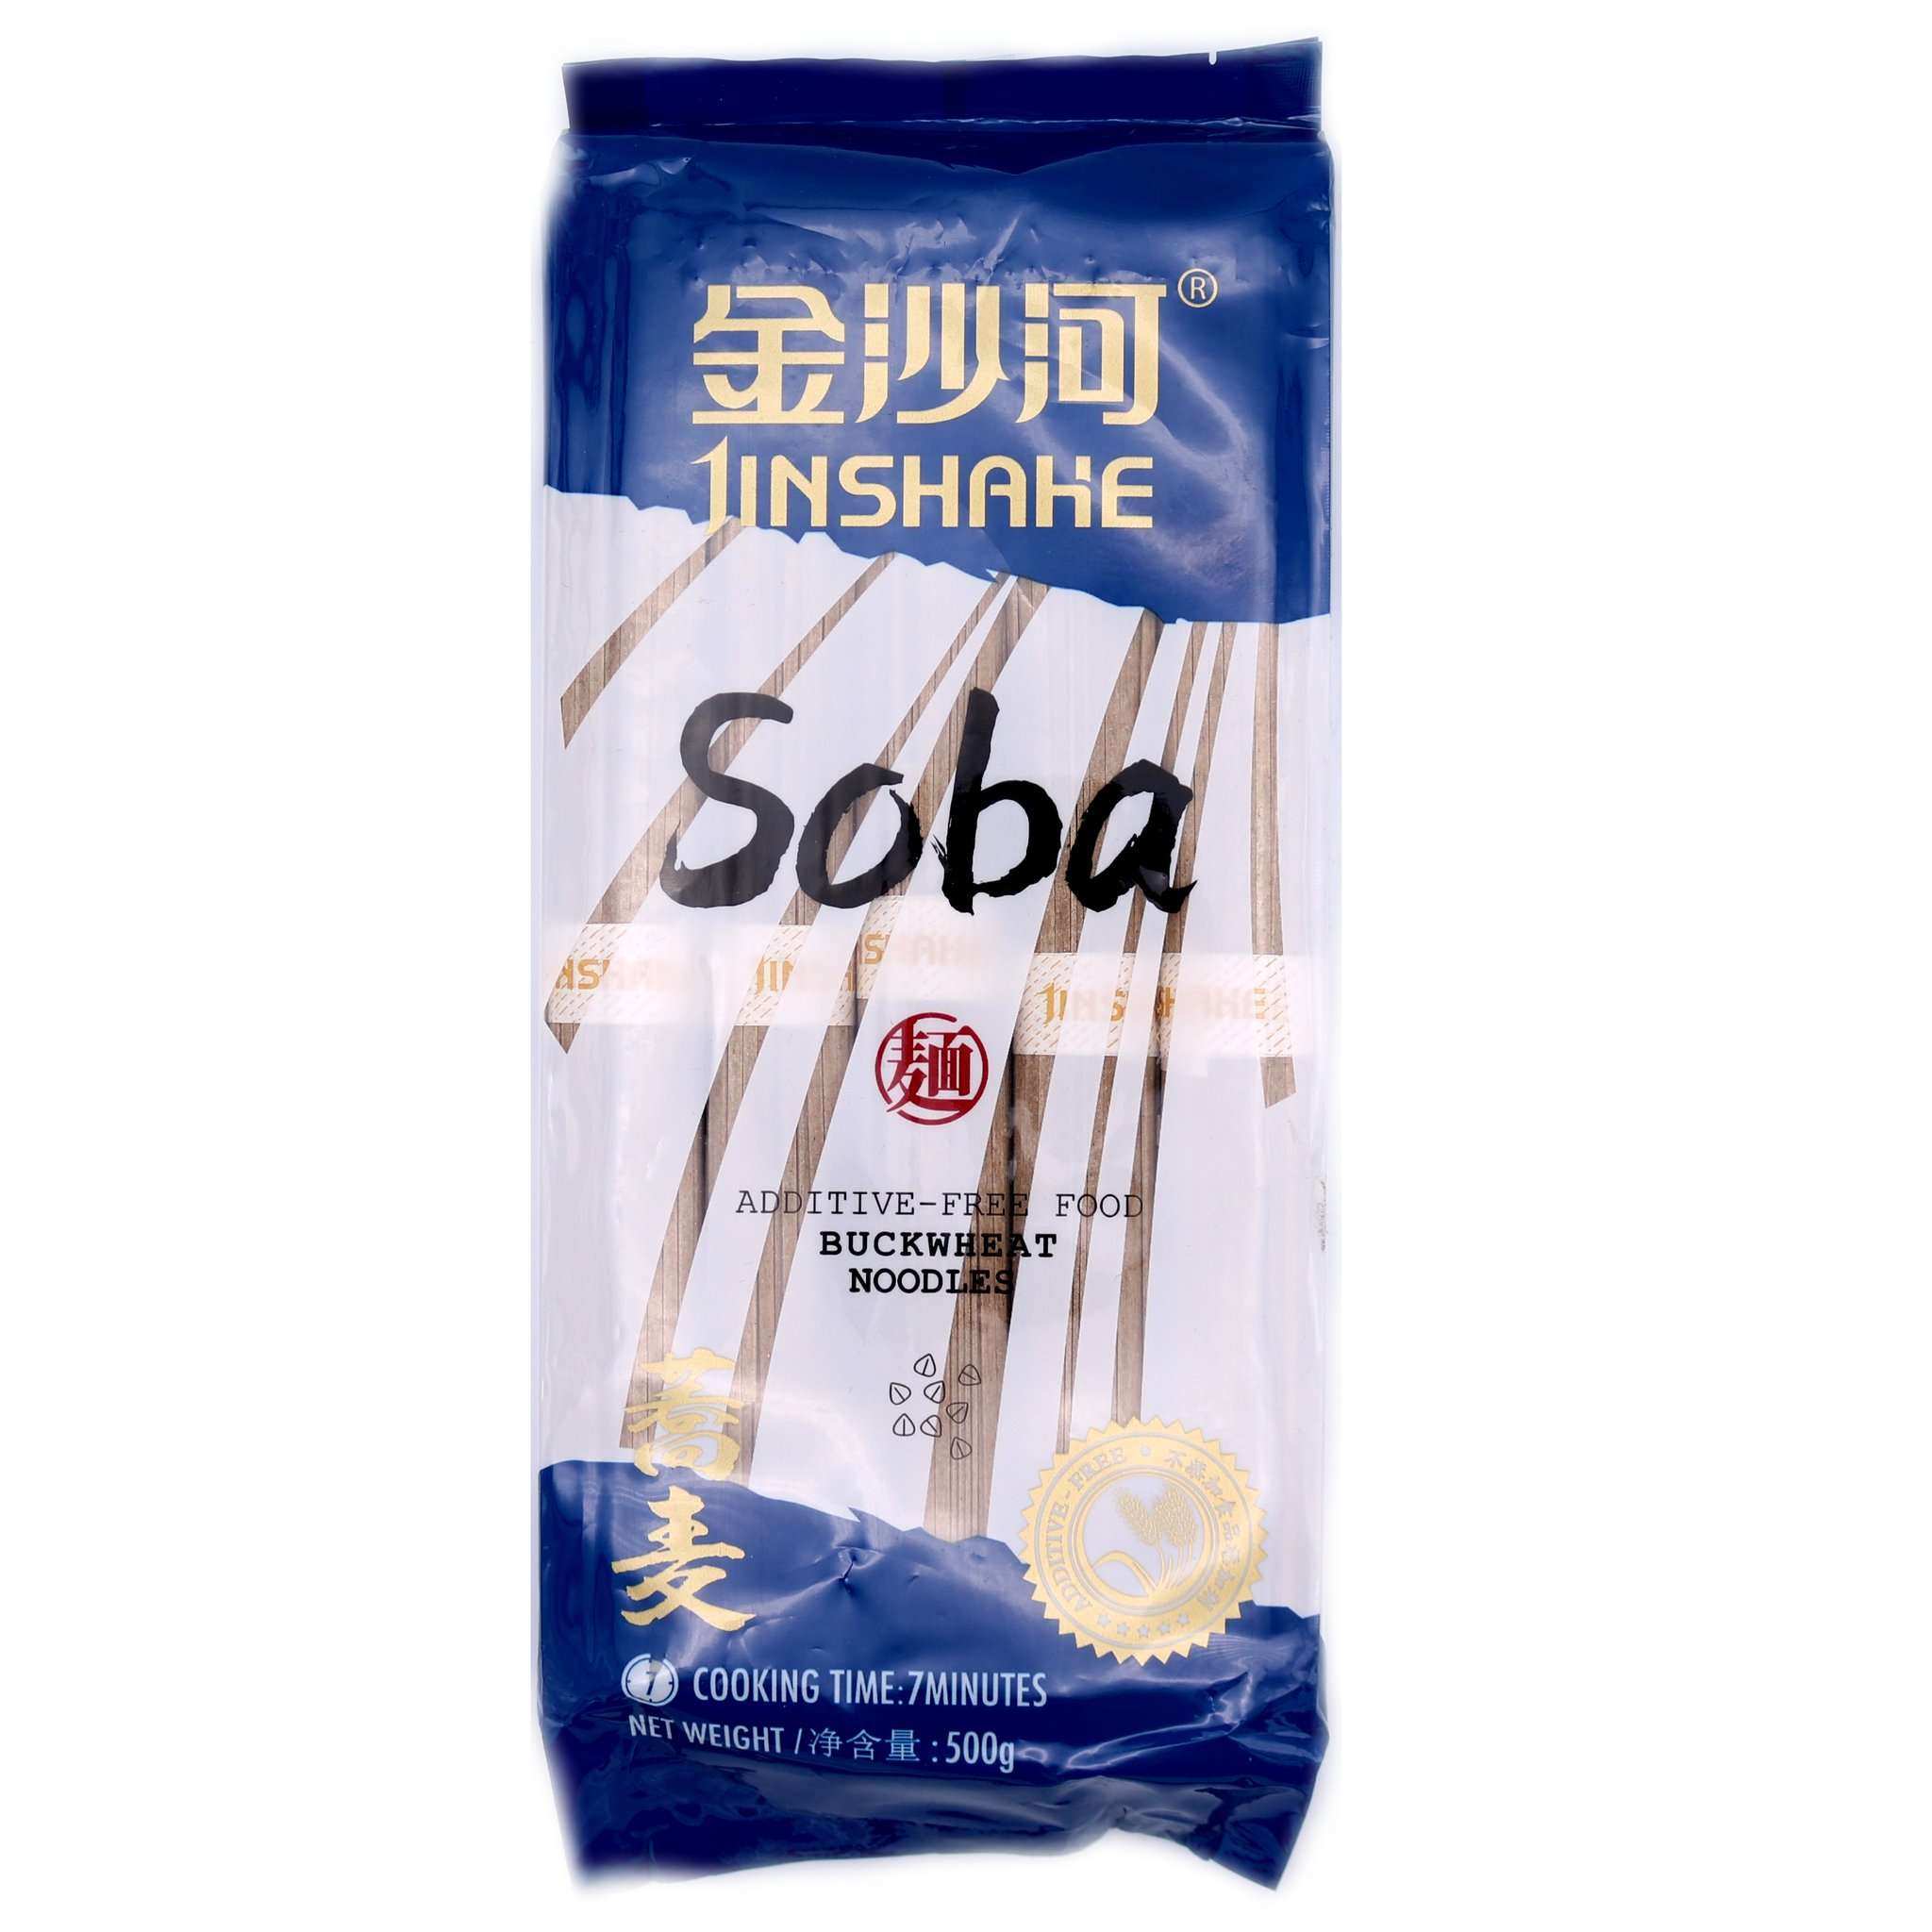 Soba Dried Noodles